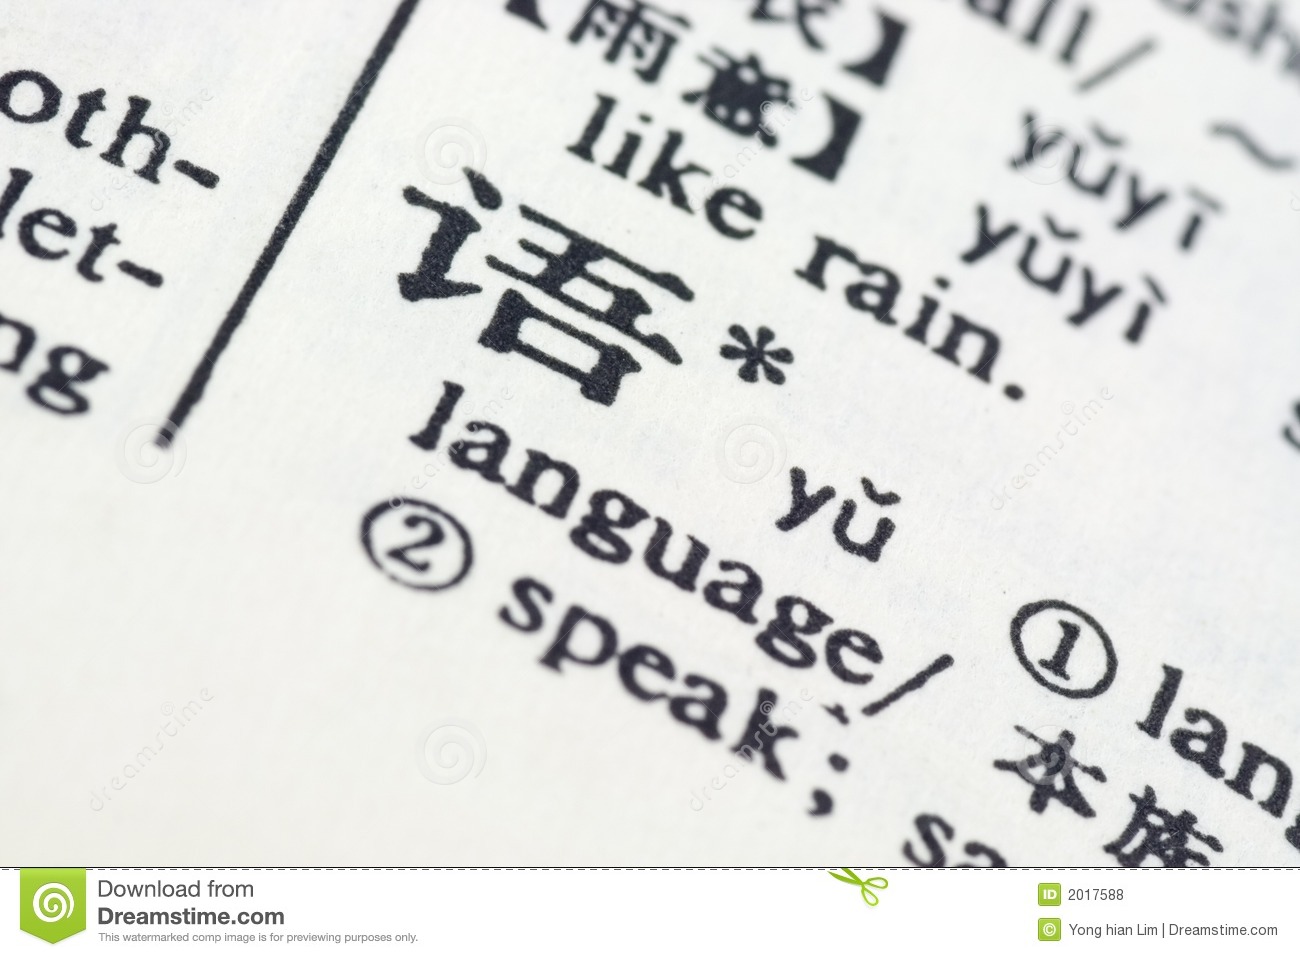 Language Written In Chinese In A Chinese English Translation